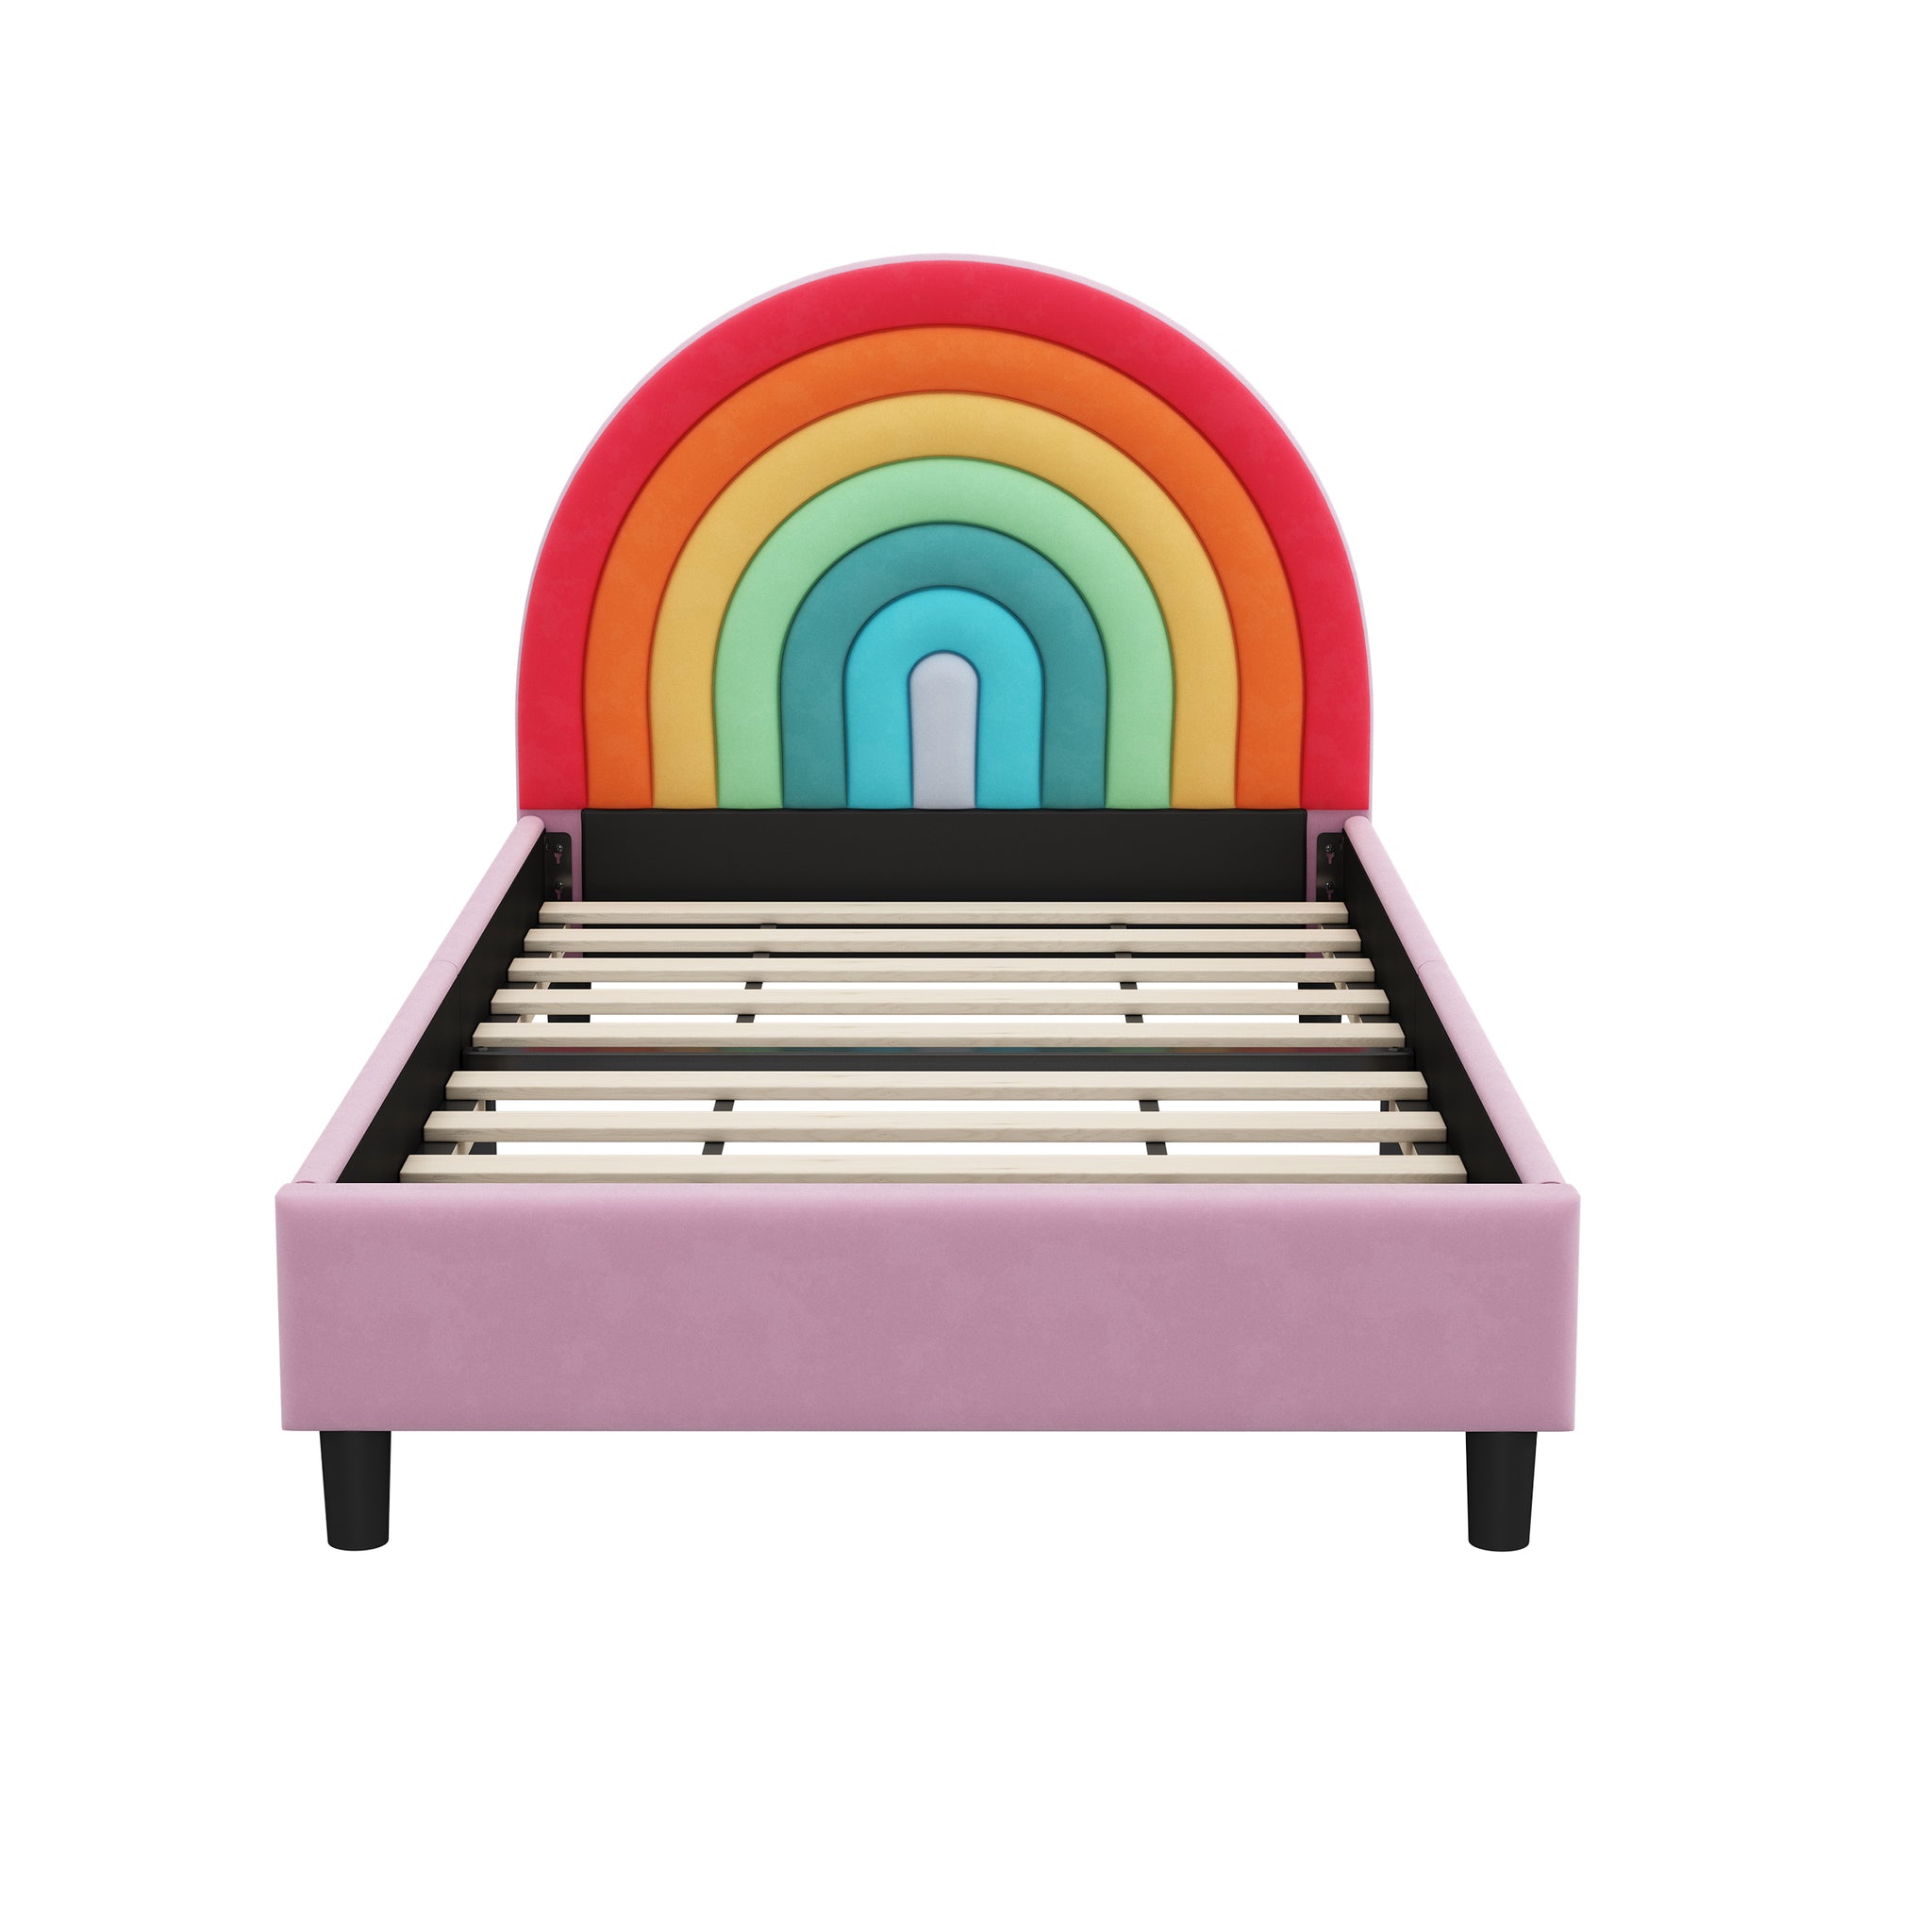 Rainbow Design Upholstered Twin Platform Bed Cute box spring not required-twin-colorful-wood-bed